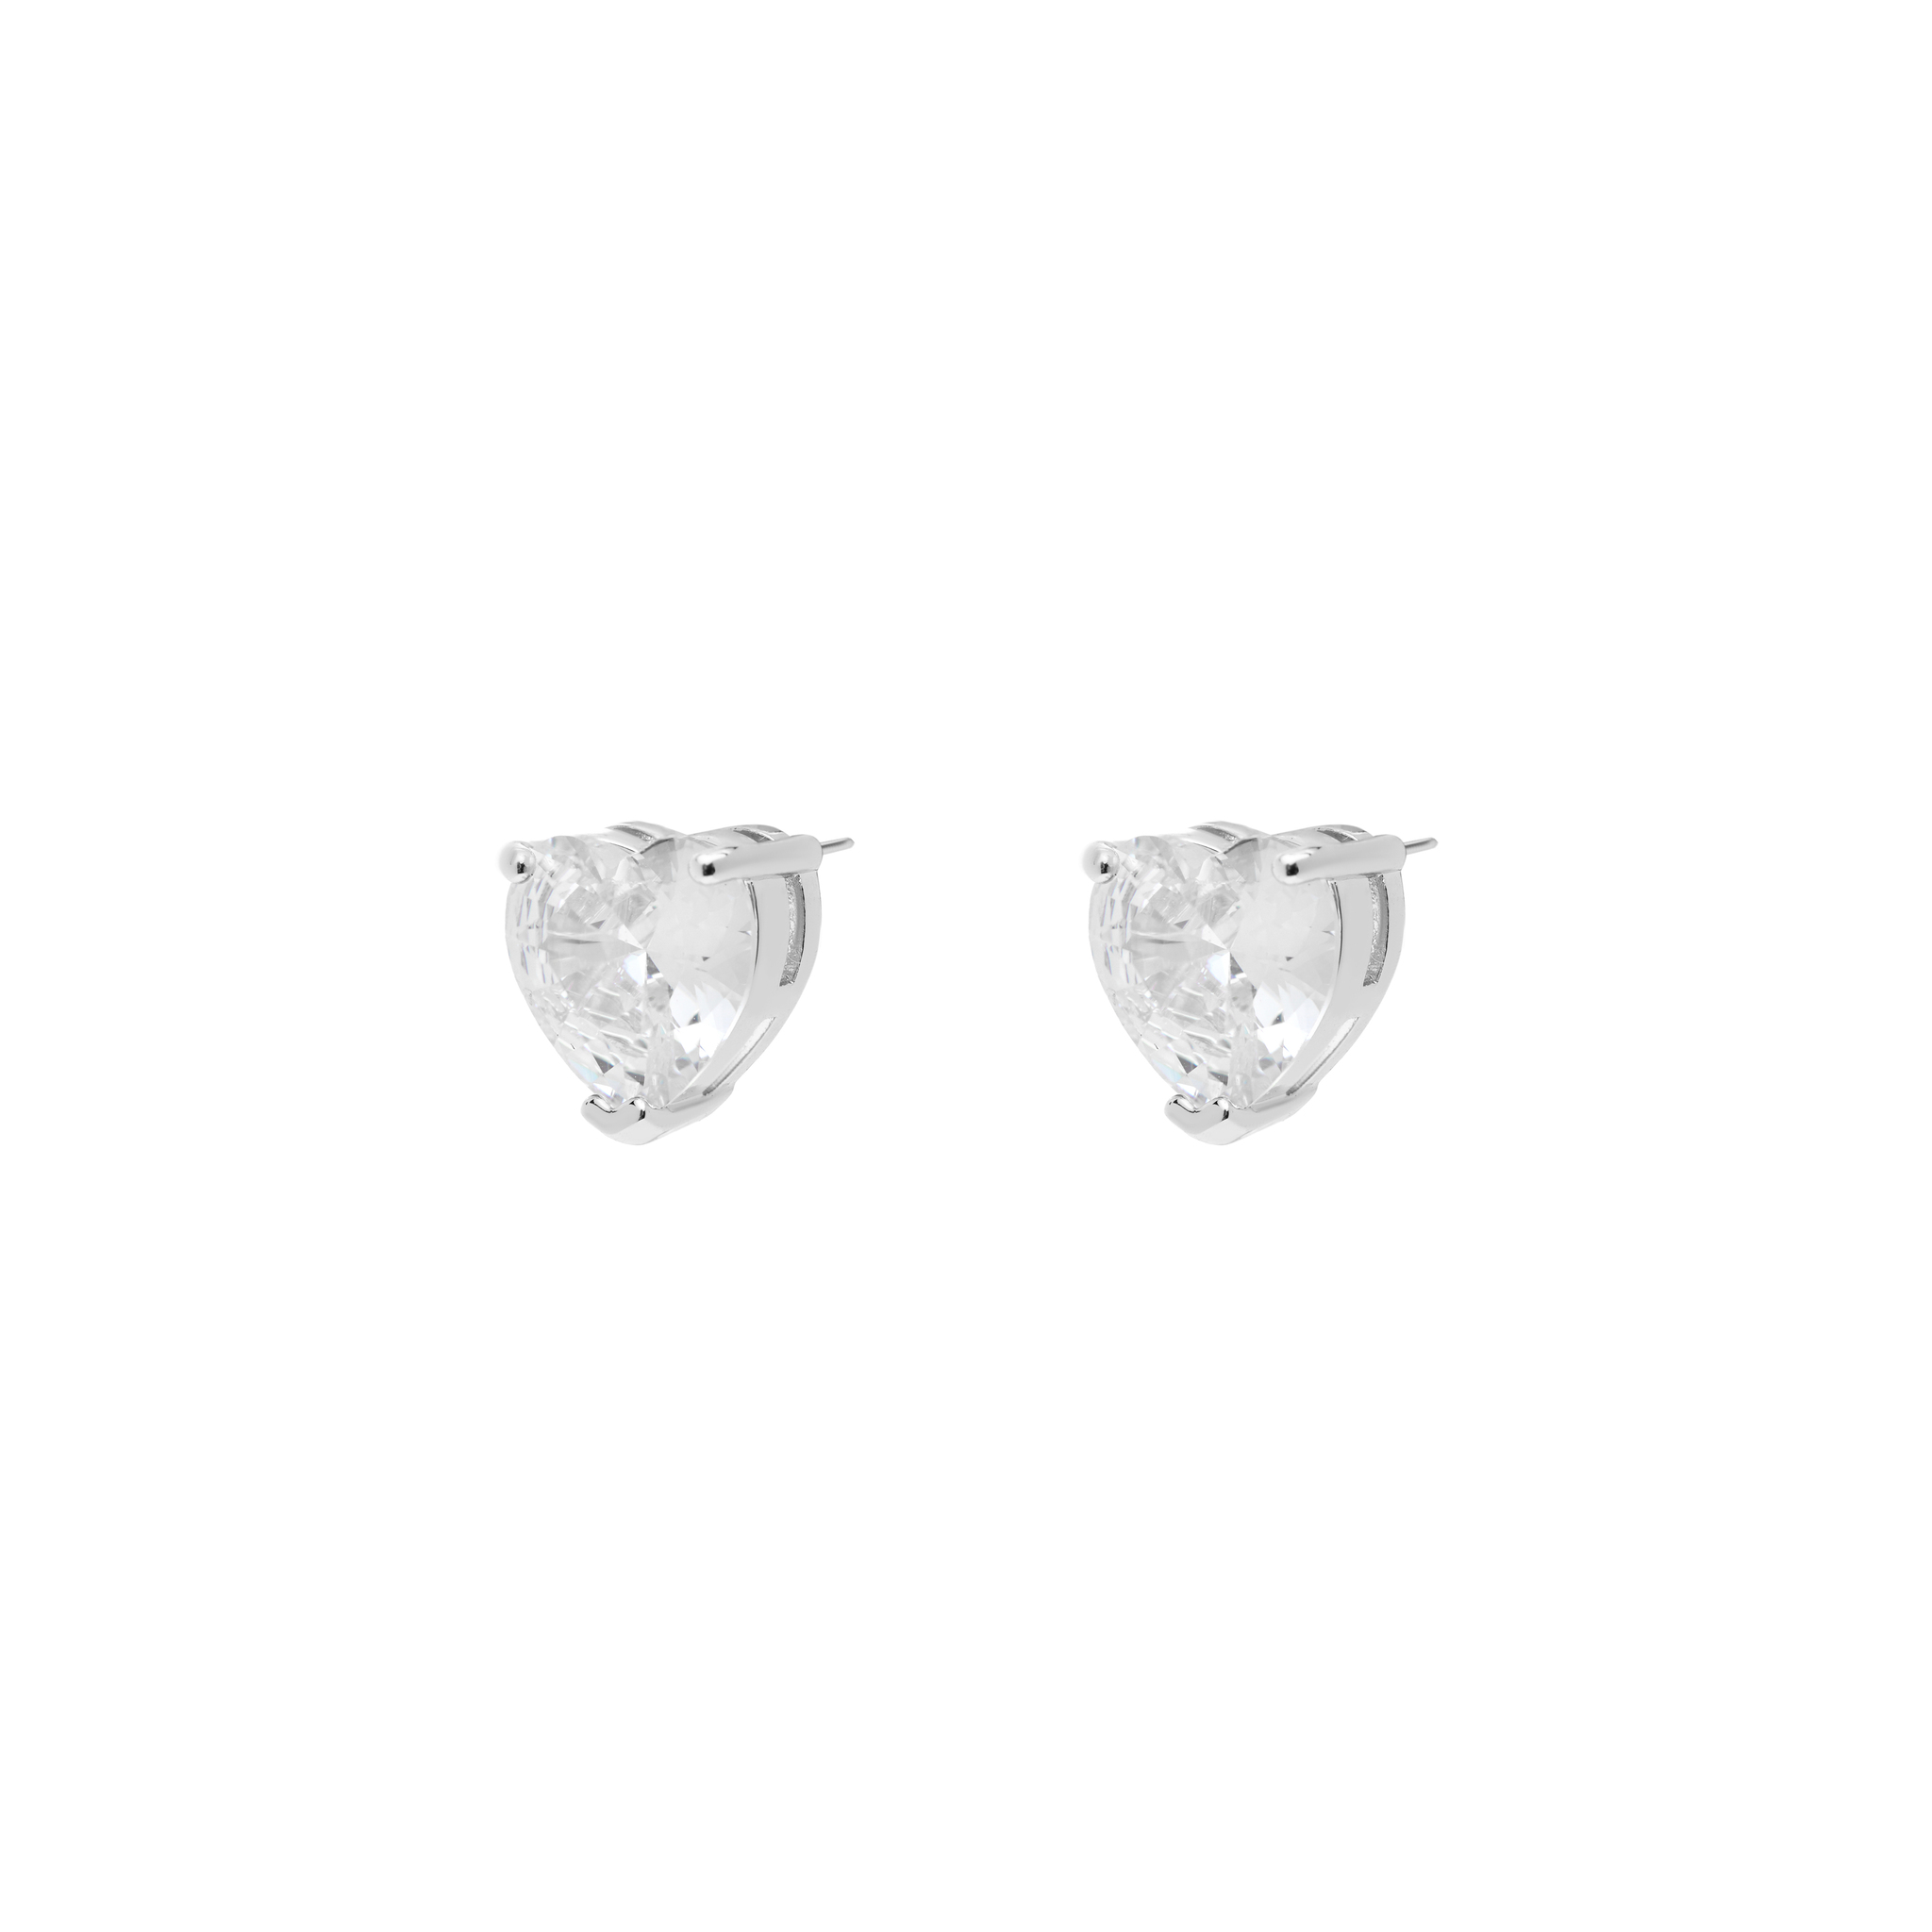 CELESTE STARRE Серьги The French Earrings – Silver celeste starre серьги the st barths earrings